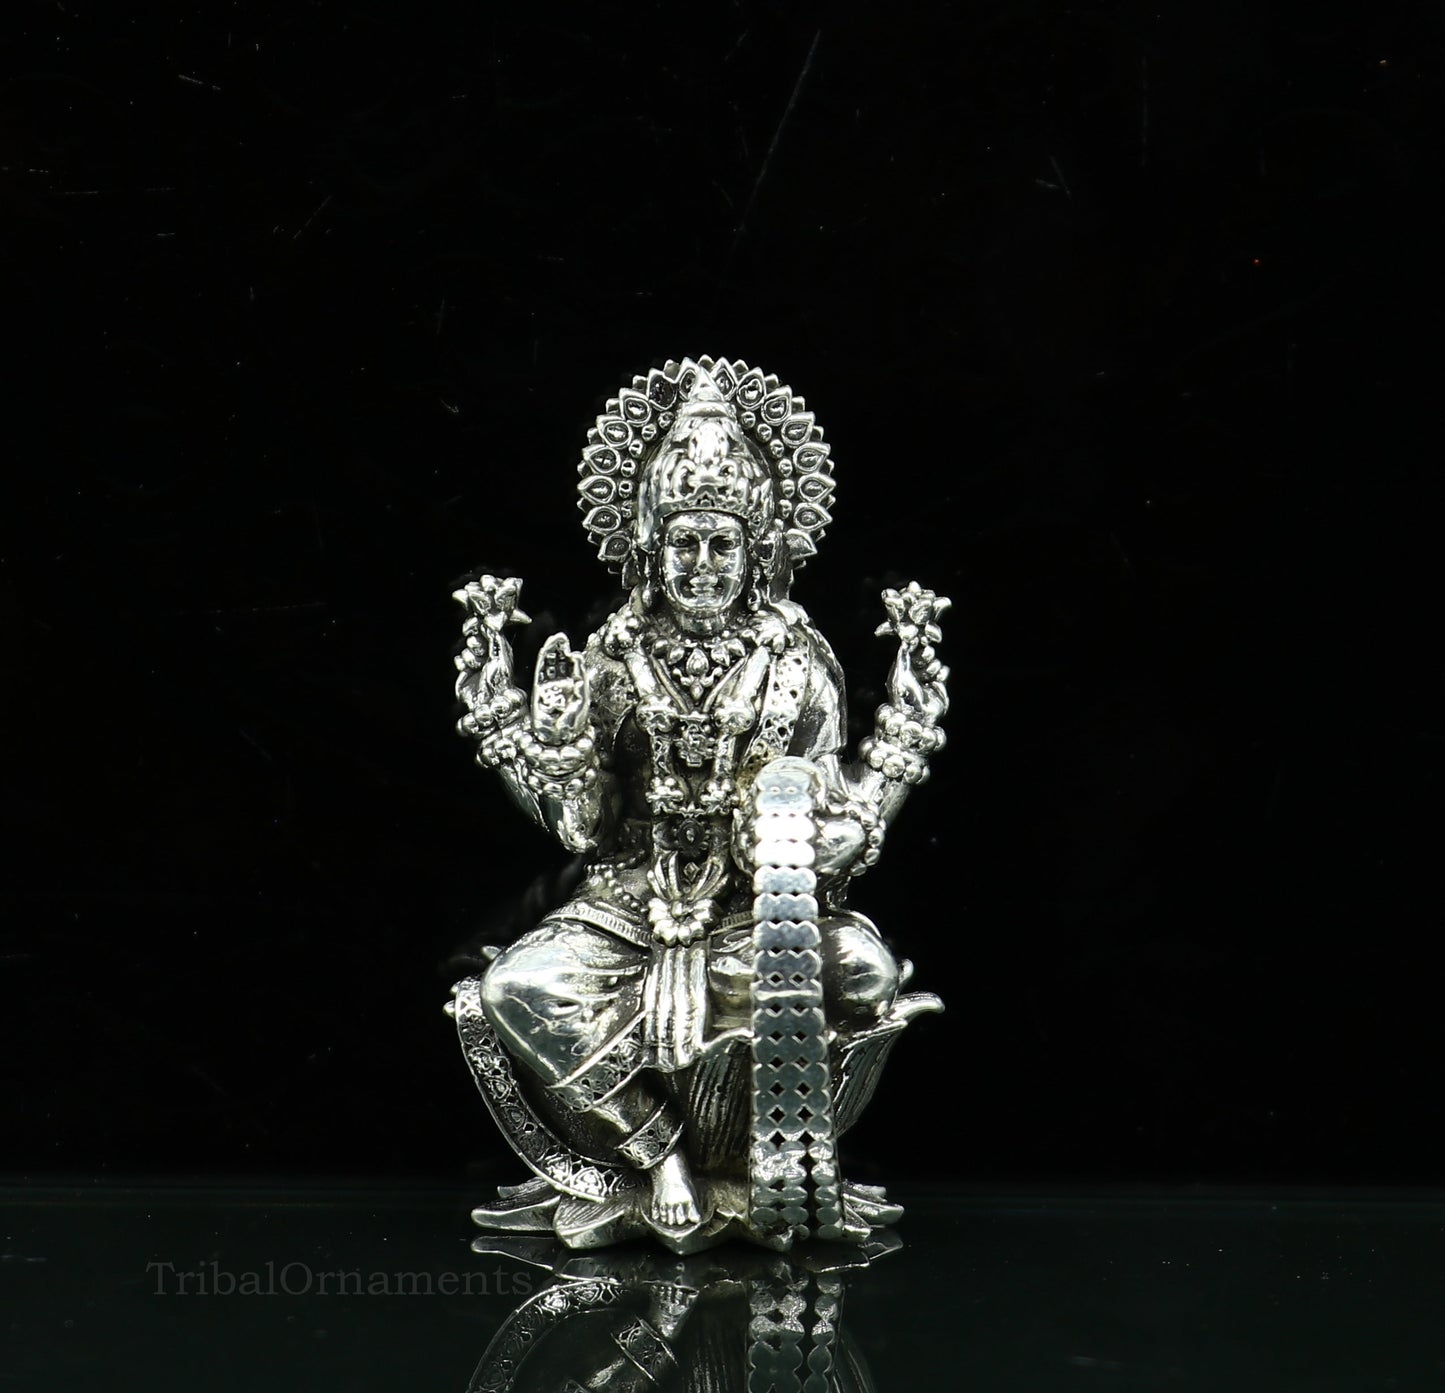 Pure 925 Sterling silver handmade customized Hindu Goddess Laxmi statue, puja article figurine, home décor puja articles gifting art26 - TRIBAL ORNAMENTS